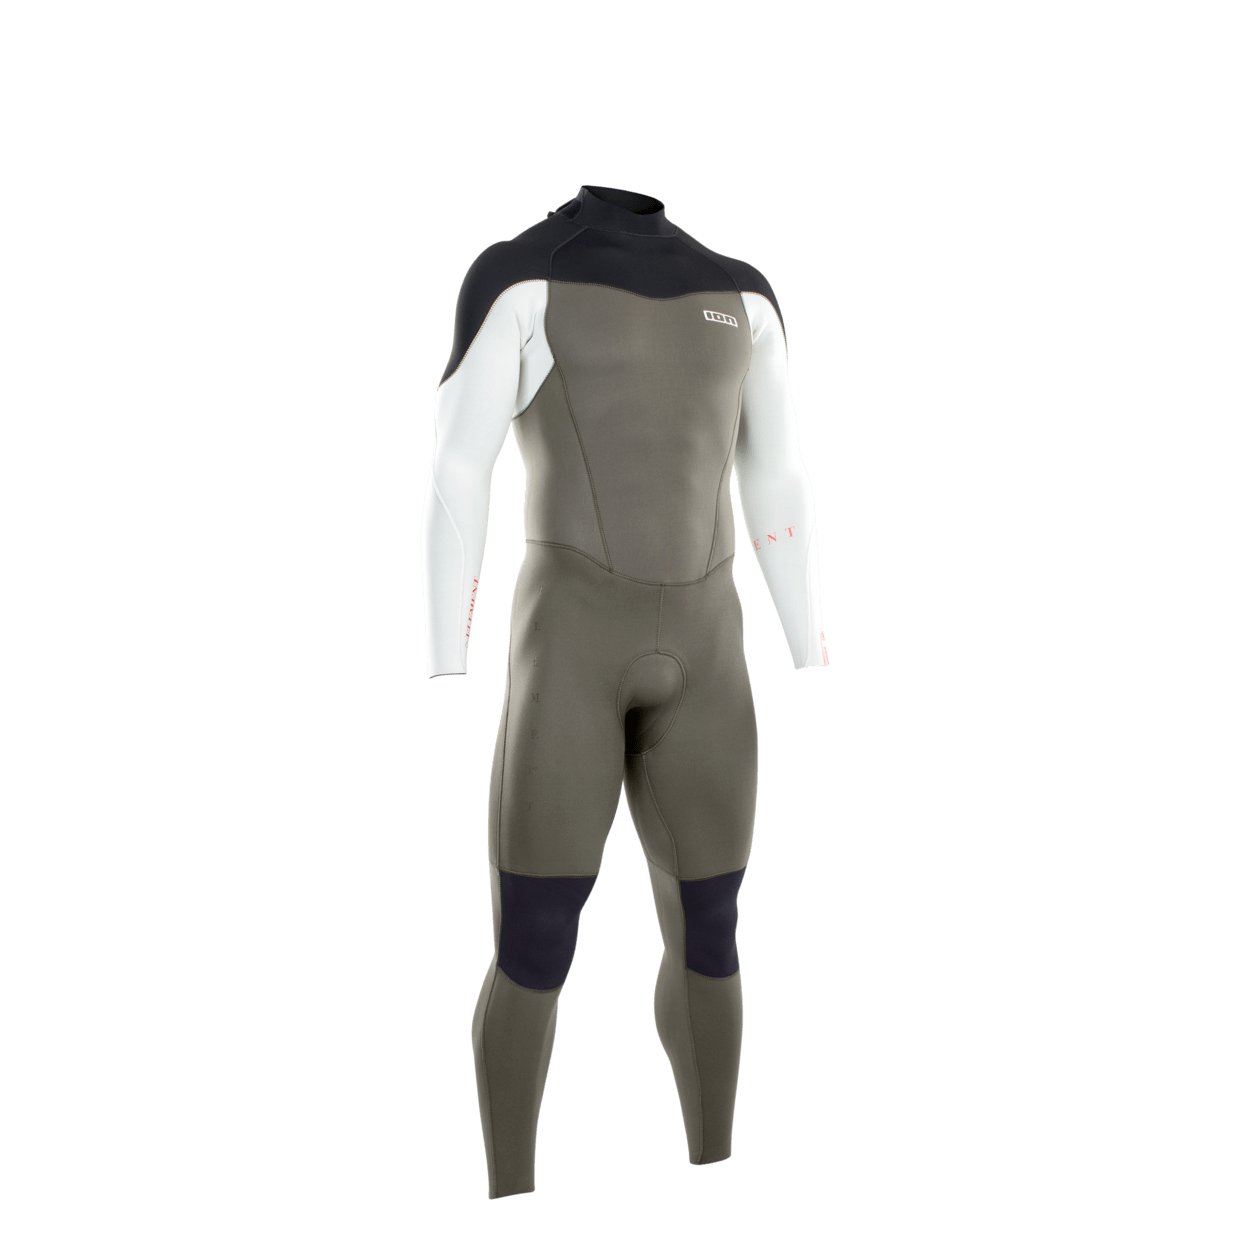 ION Men Wetsuit Element 3/2 Back Zip 2022 - Worthing Watersports - 9008415949168 - Wetsuits - ION Water